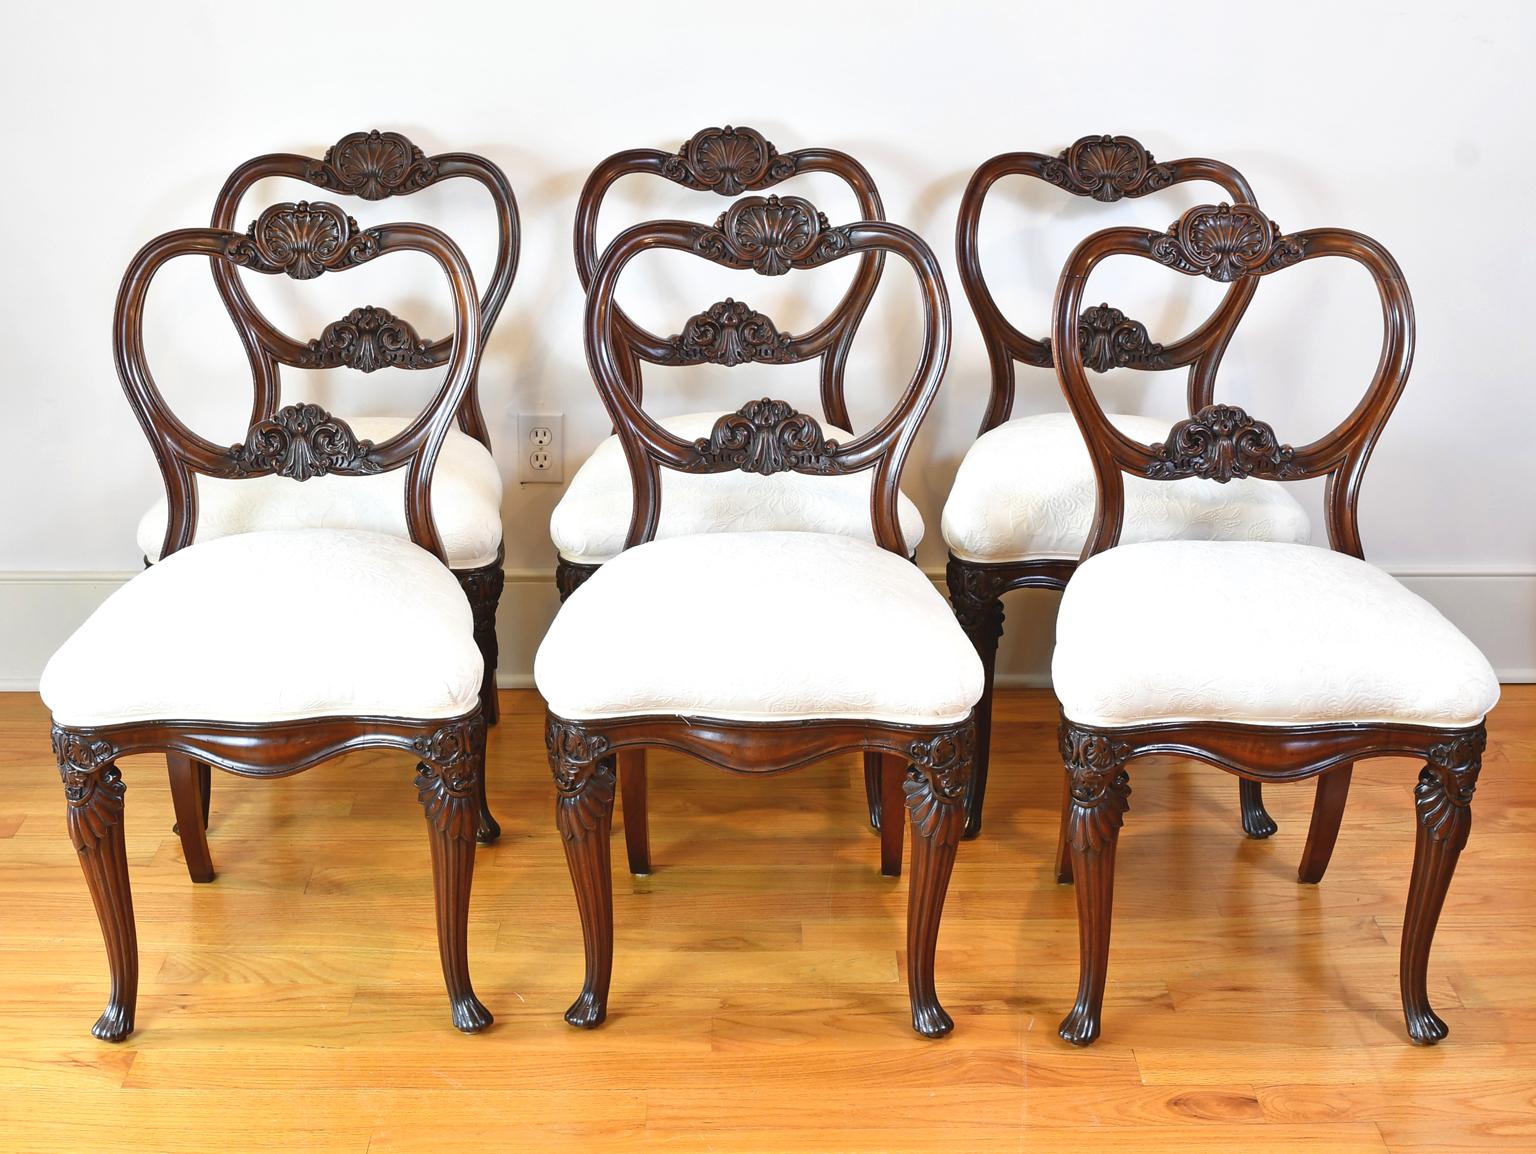 A very lovely set of six dining chairs in dence West Indies mahogany of high quality with well-articulated carvings of scallop and acanthus on crest, rail, and knee. Carved frame of upholstered seat has a serpentine form on all four-side with front